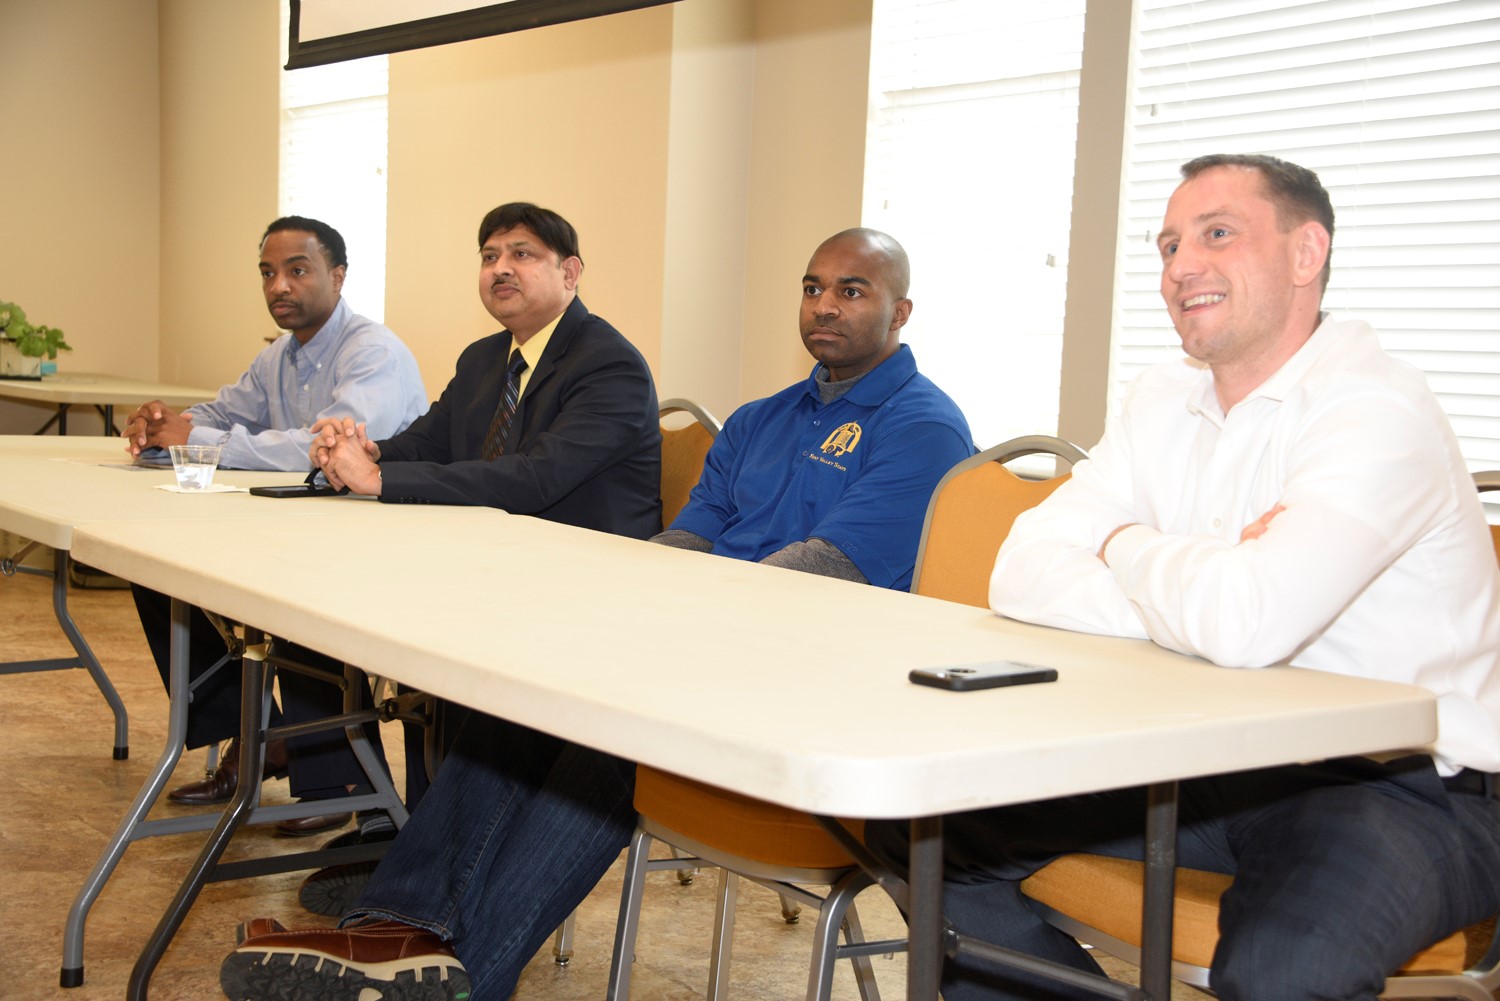 (From left to right) Dr. Cedric Ogden, FVSU assistant professor of agricultural engineering; Dr. Hari Singh, FVSU research professor and coordinator for the biotechnology program; Donald Bacoat, FVSU aquaculture and production assistant and Ned Van Allan,